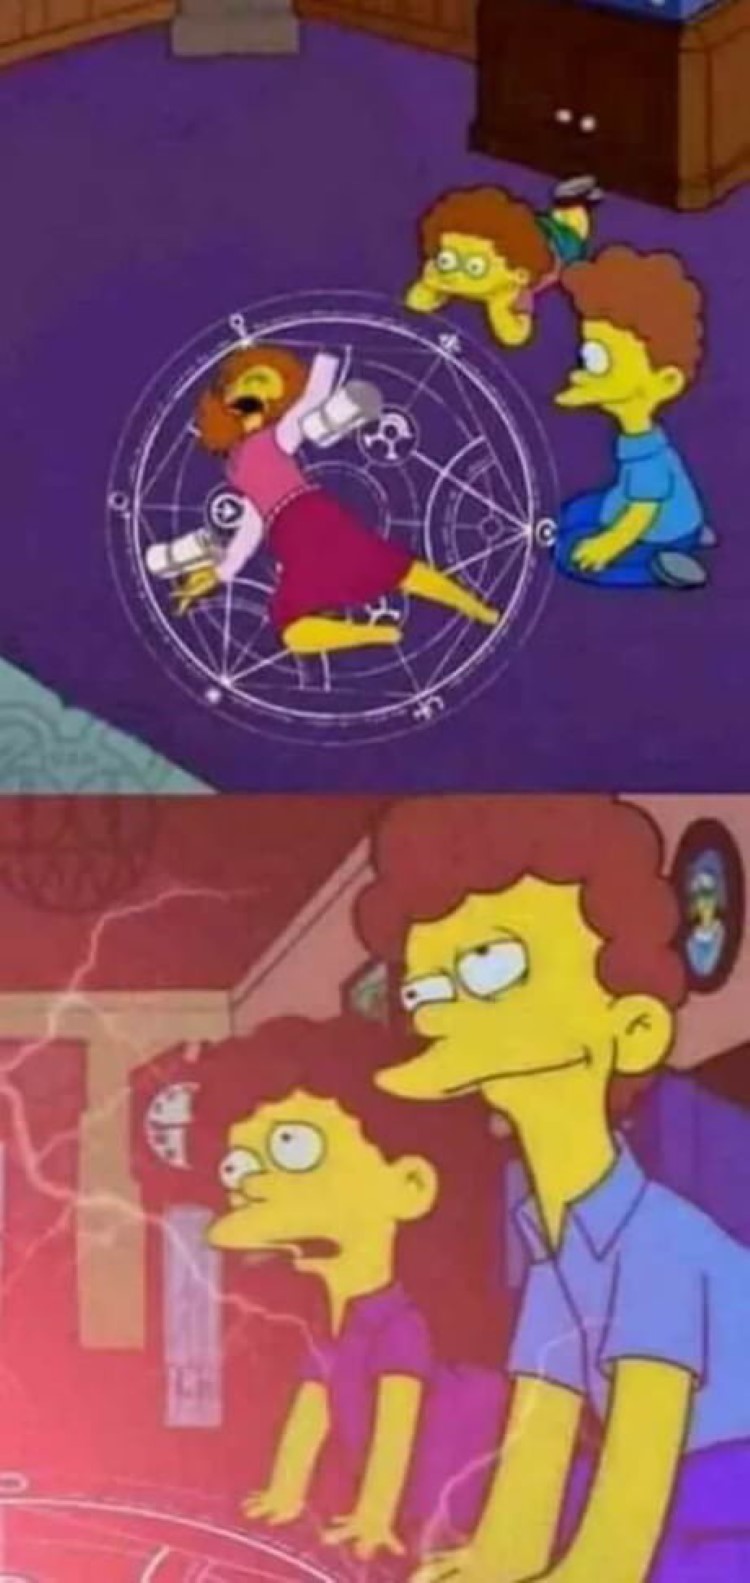 Todd and Rod Flanders Fullmetal crossover meme